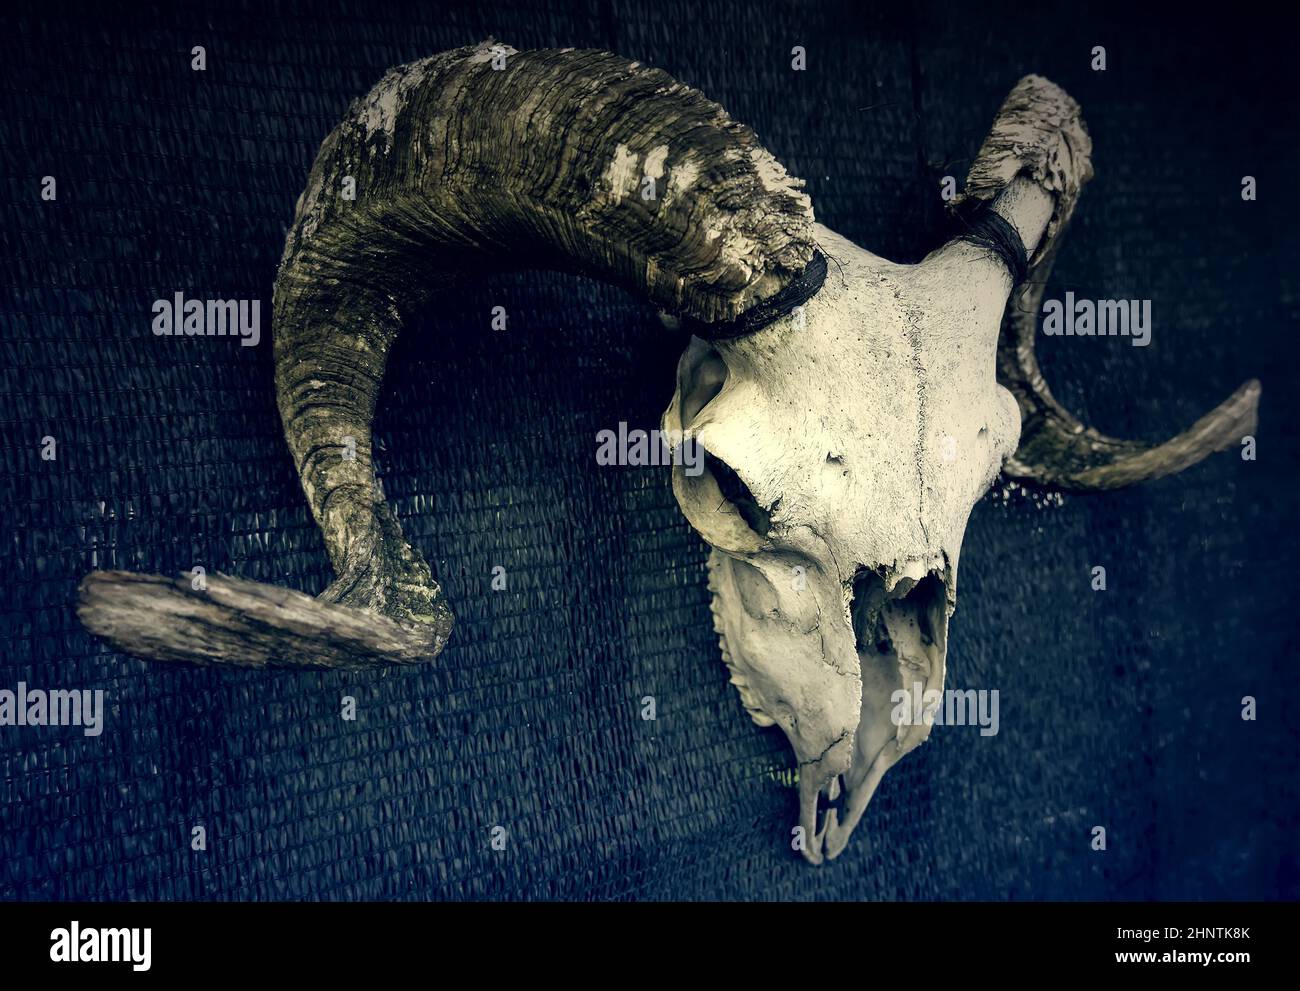 Detail of dead animal bones for decoration, fear and witchcraft Stock Photo